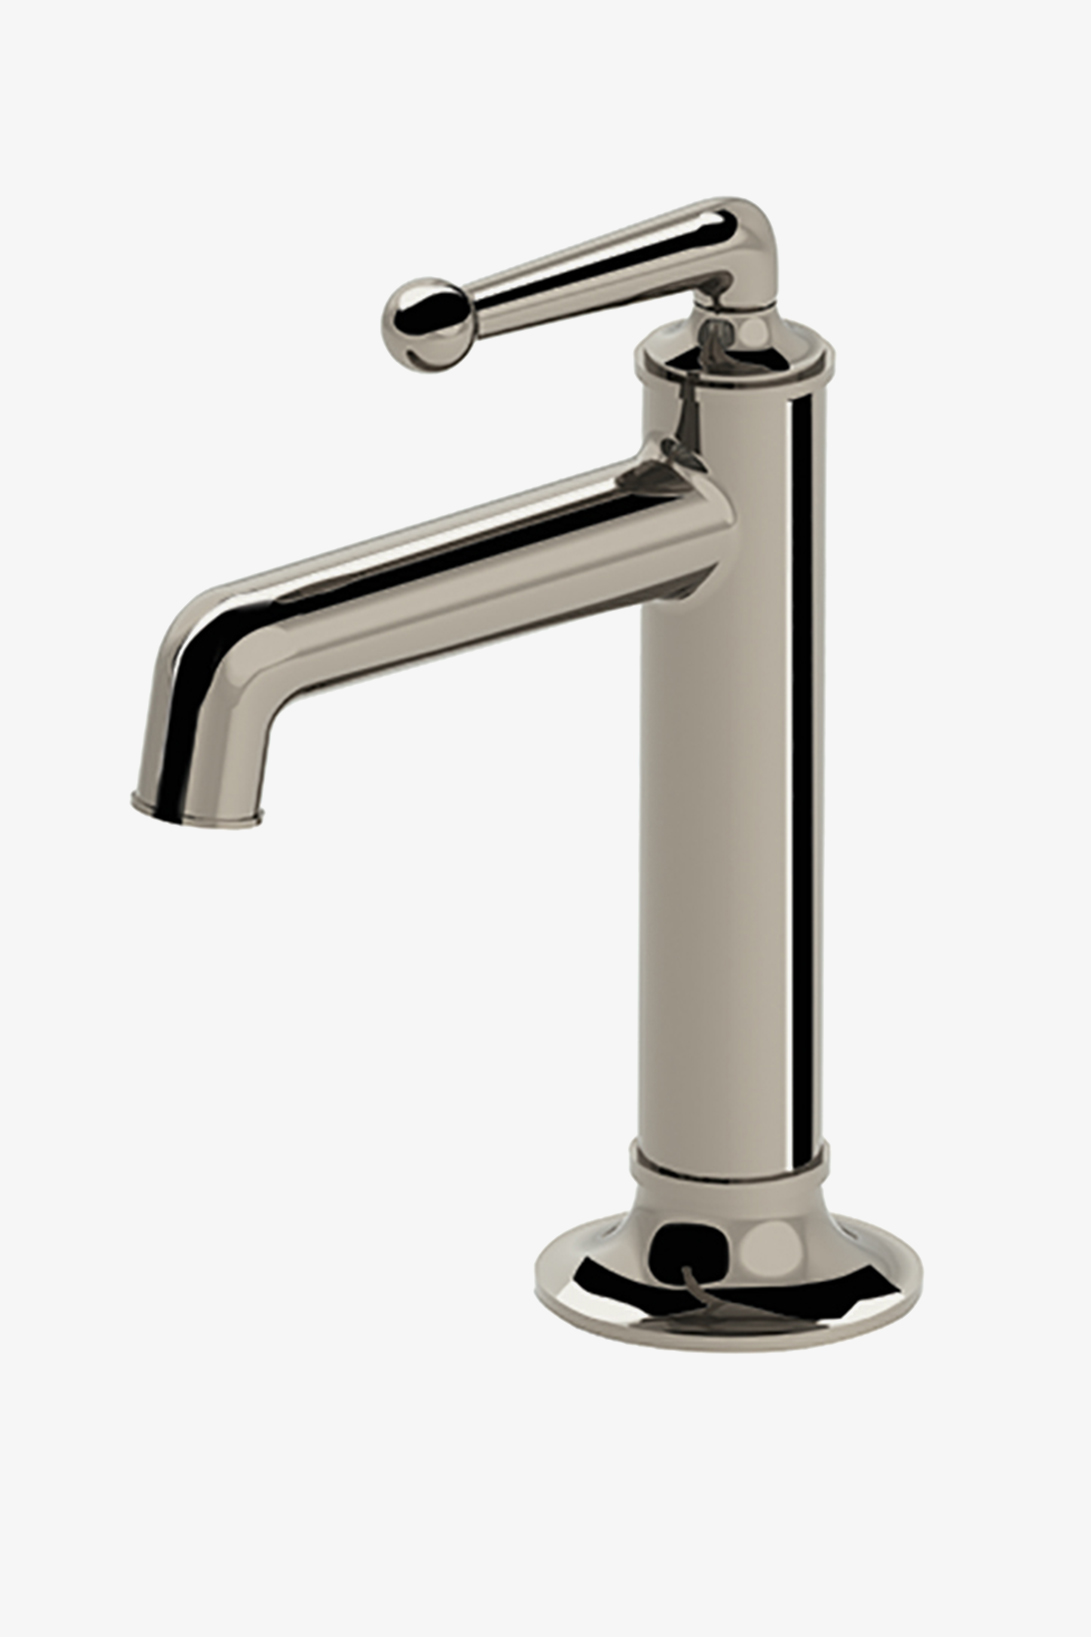 List of Dash faucets - claim free DASH (Faucet Monitor)